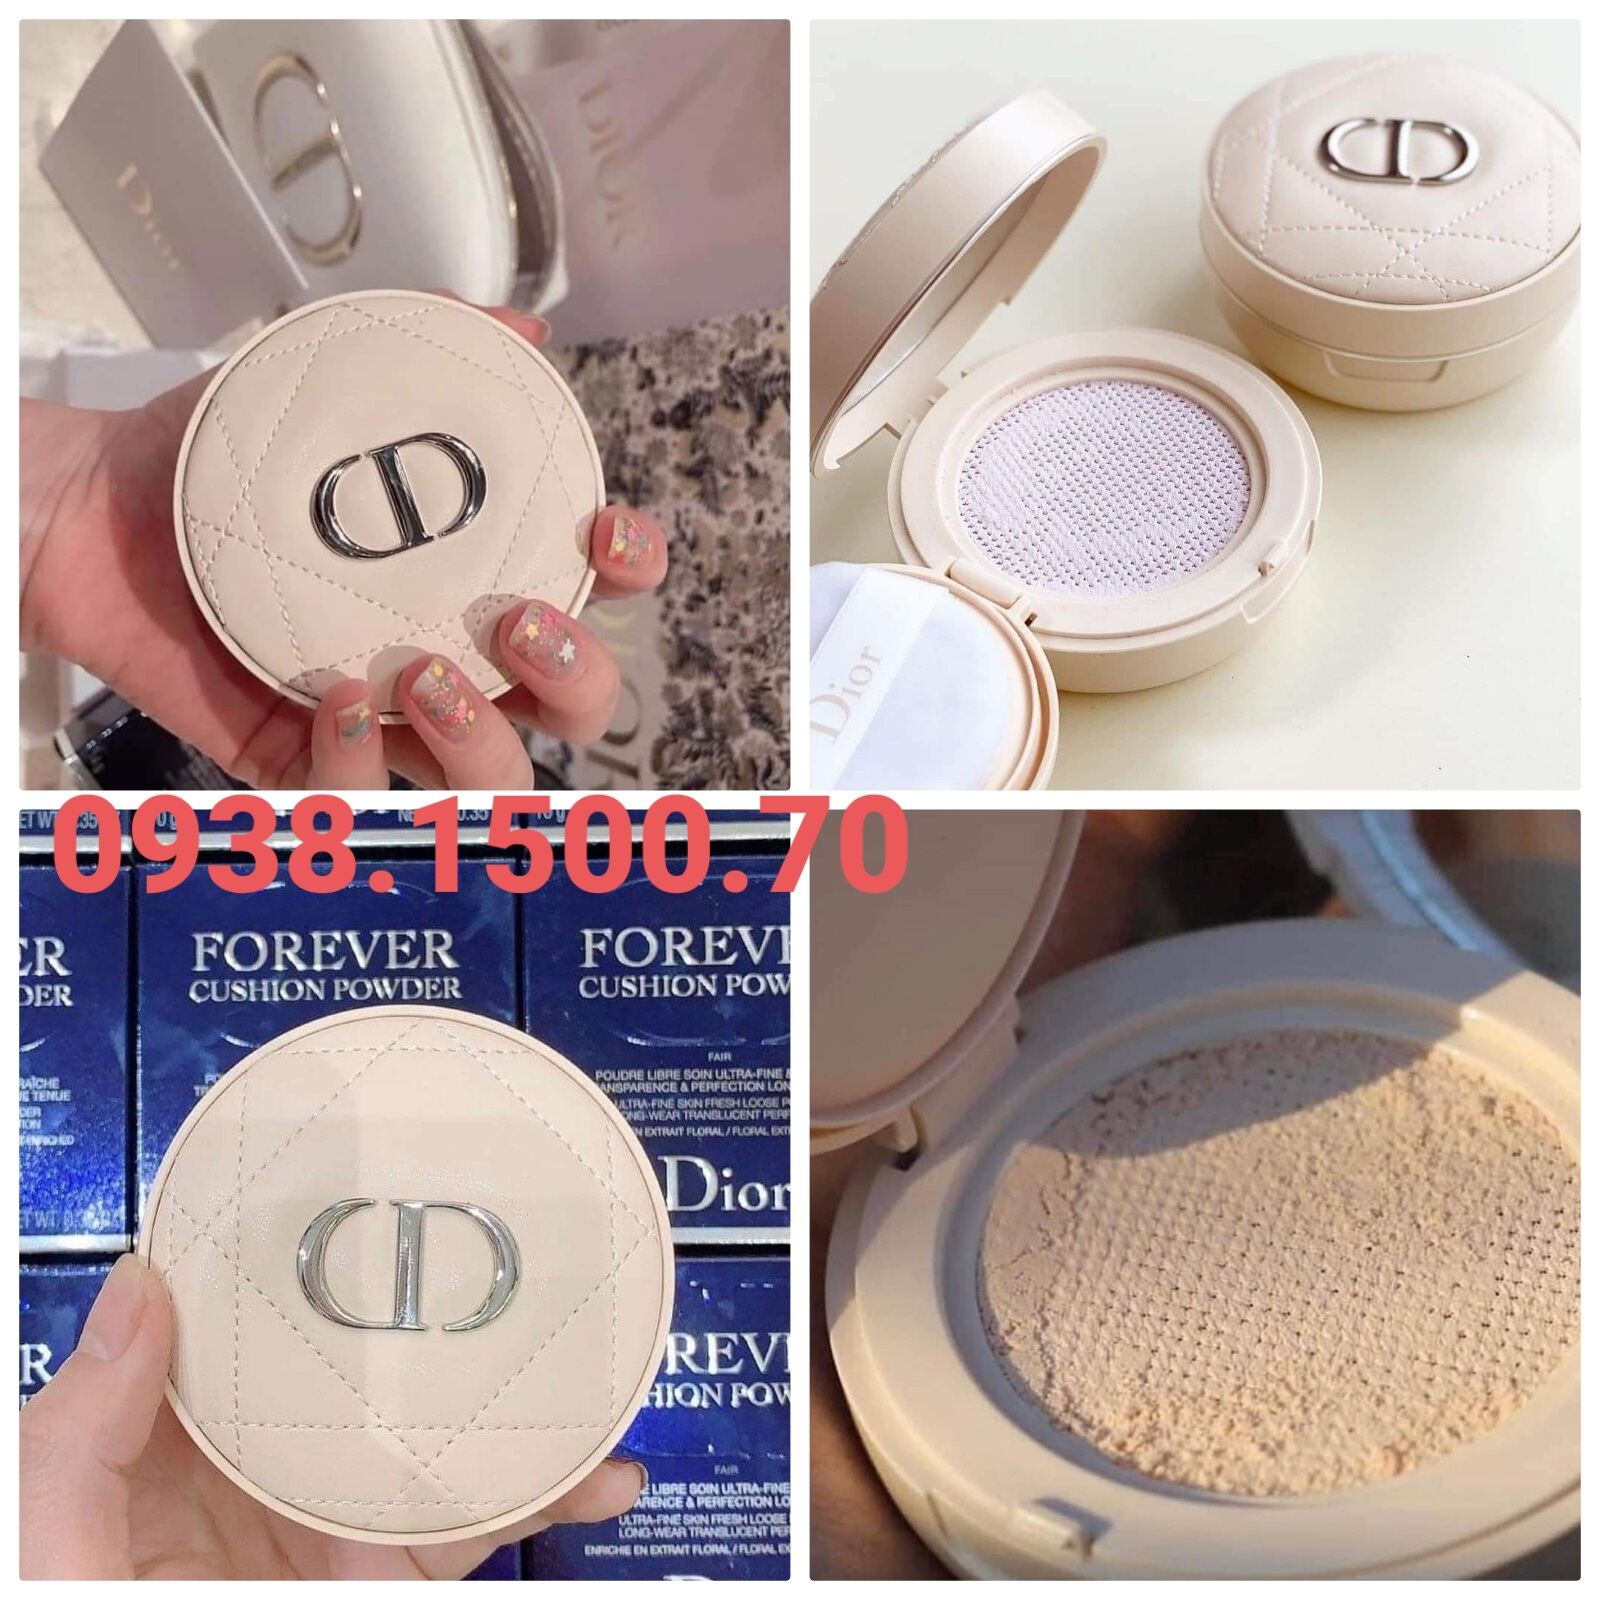 NEW Dior Forever Cushion Powder Skin Veil and Perfect Fix TryOn Wear  Test and Review Light020  YouTube